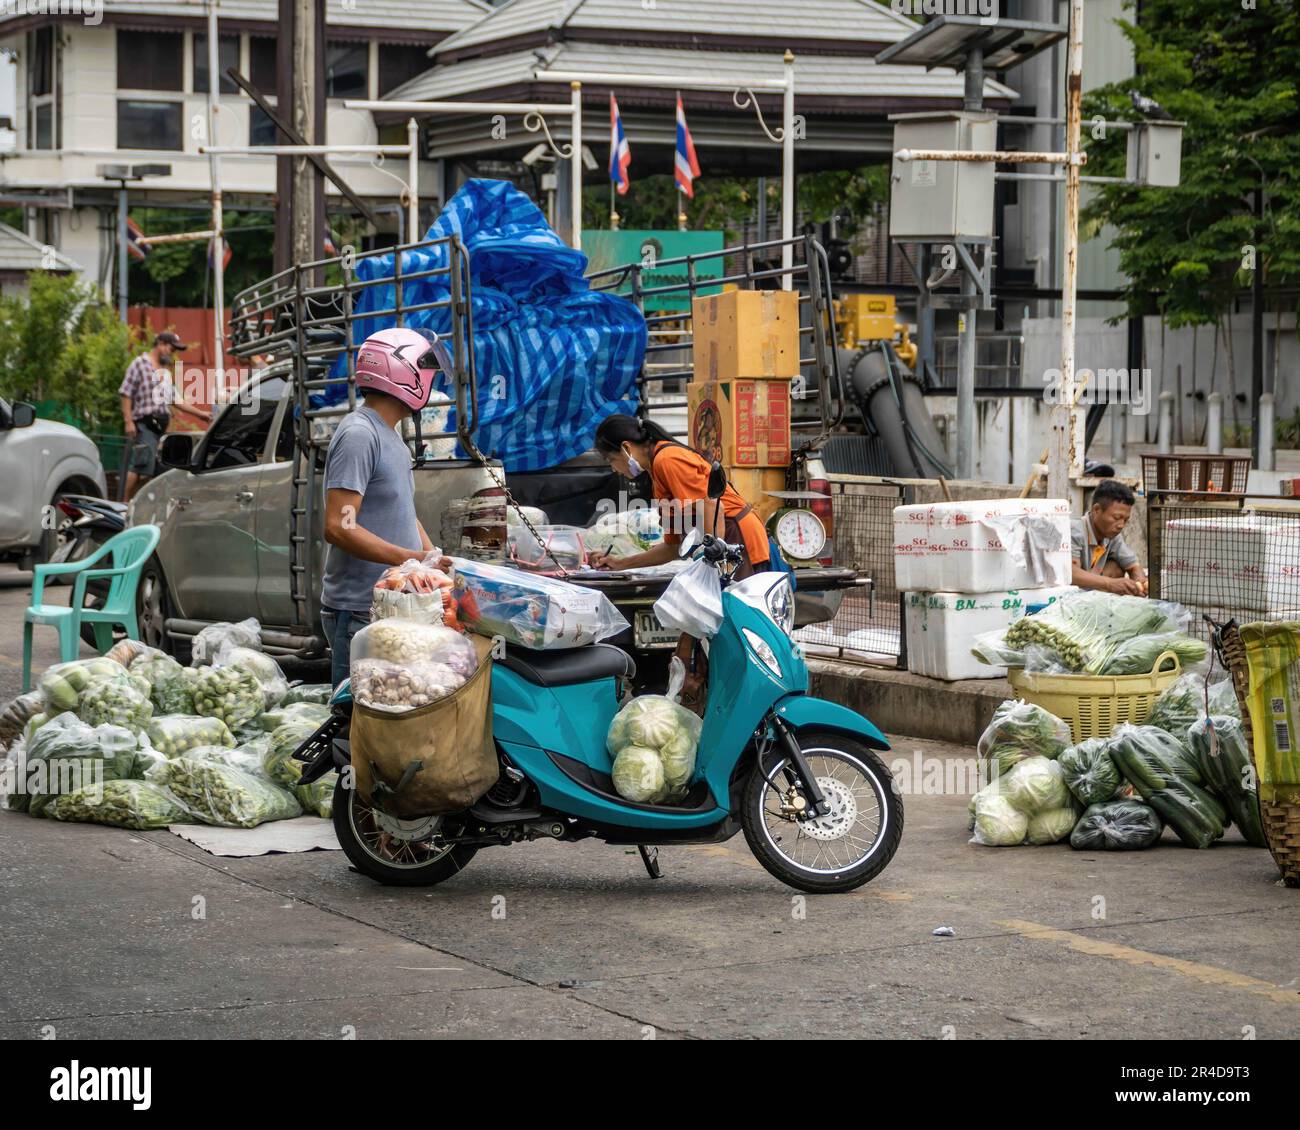 A wholesale vegetable street vendor is writing a bill for a customer waiting with his motorcycle, on the adjacent street of The Bangkok Flower Market (Pak Khlong Talat) located by the Chao Phraya river, on Rattanakosin island, in Phra Nakhon district. Bangkok Flower Market (Pak Khlong Talad) Thailand's largest wholesale flower market, open 24 hours a day, 7 days a week which is adjoining a fresh vegetables, fruits and herbs market, situated on Chak Phet Road, near the Memorial Bridge (Saphan Phut) in the historic old city. (Photo by Nathalie Jamois/SOPA Images/Sipa USA) Stock Photo